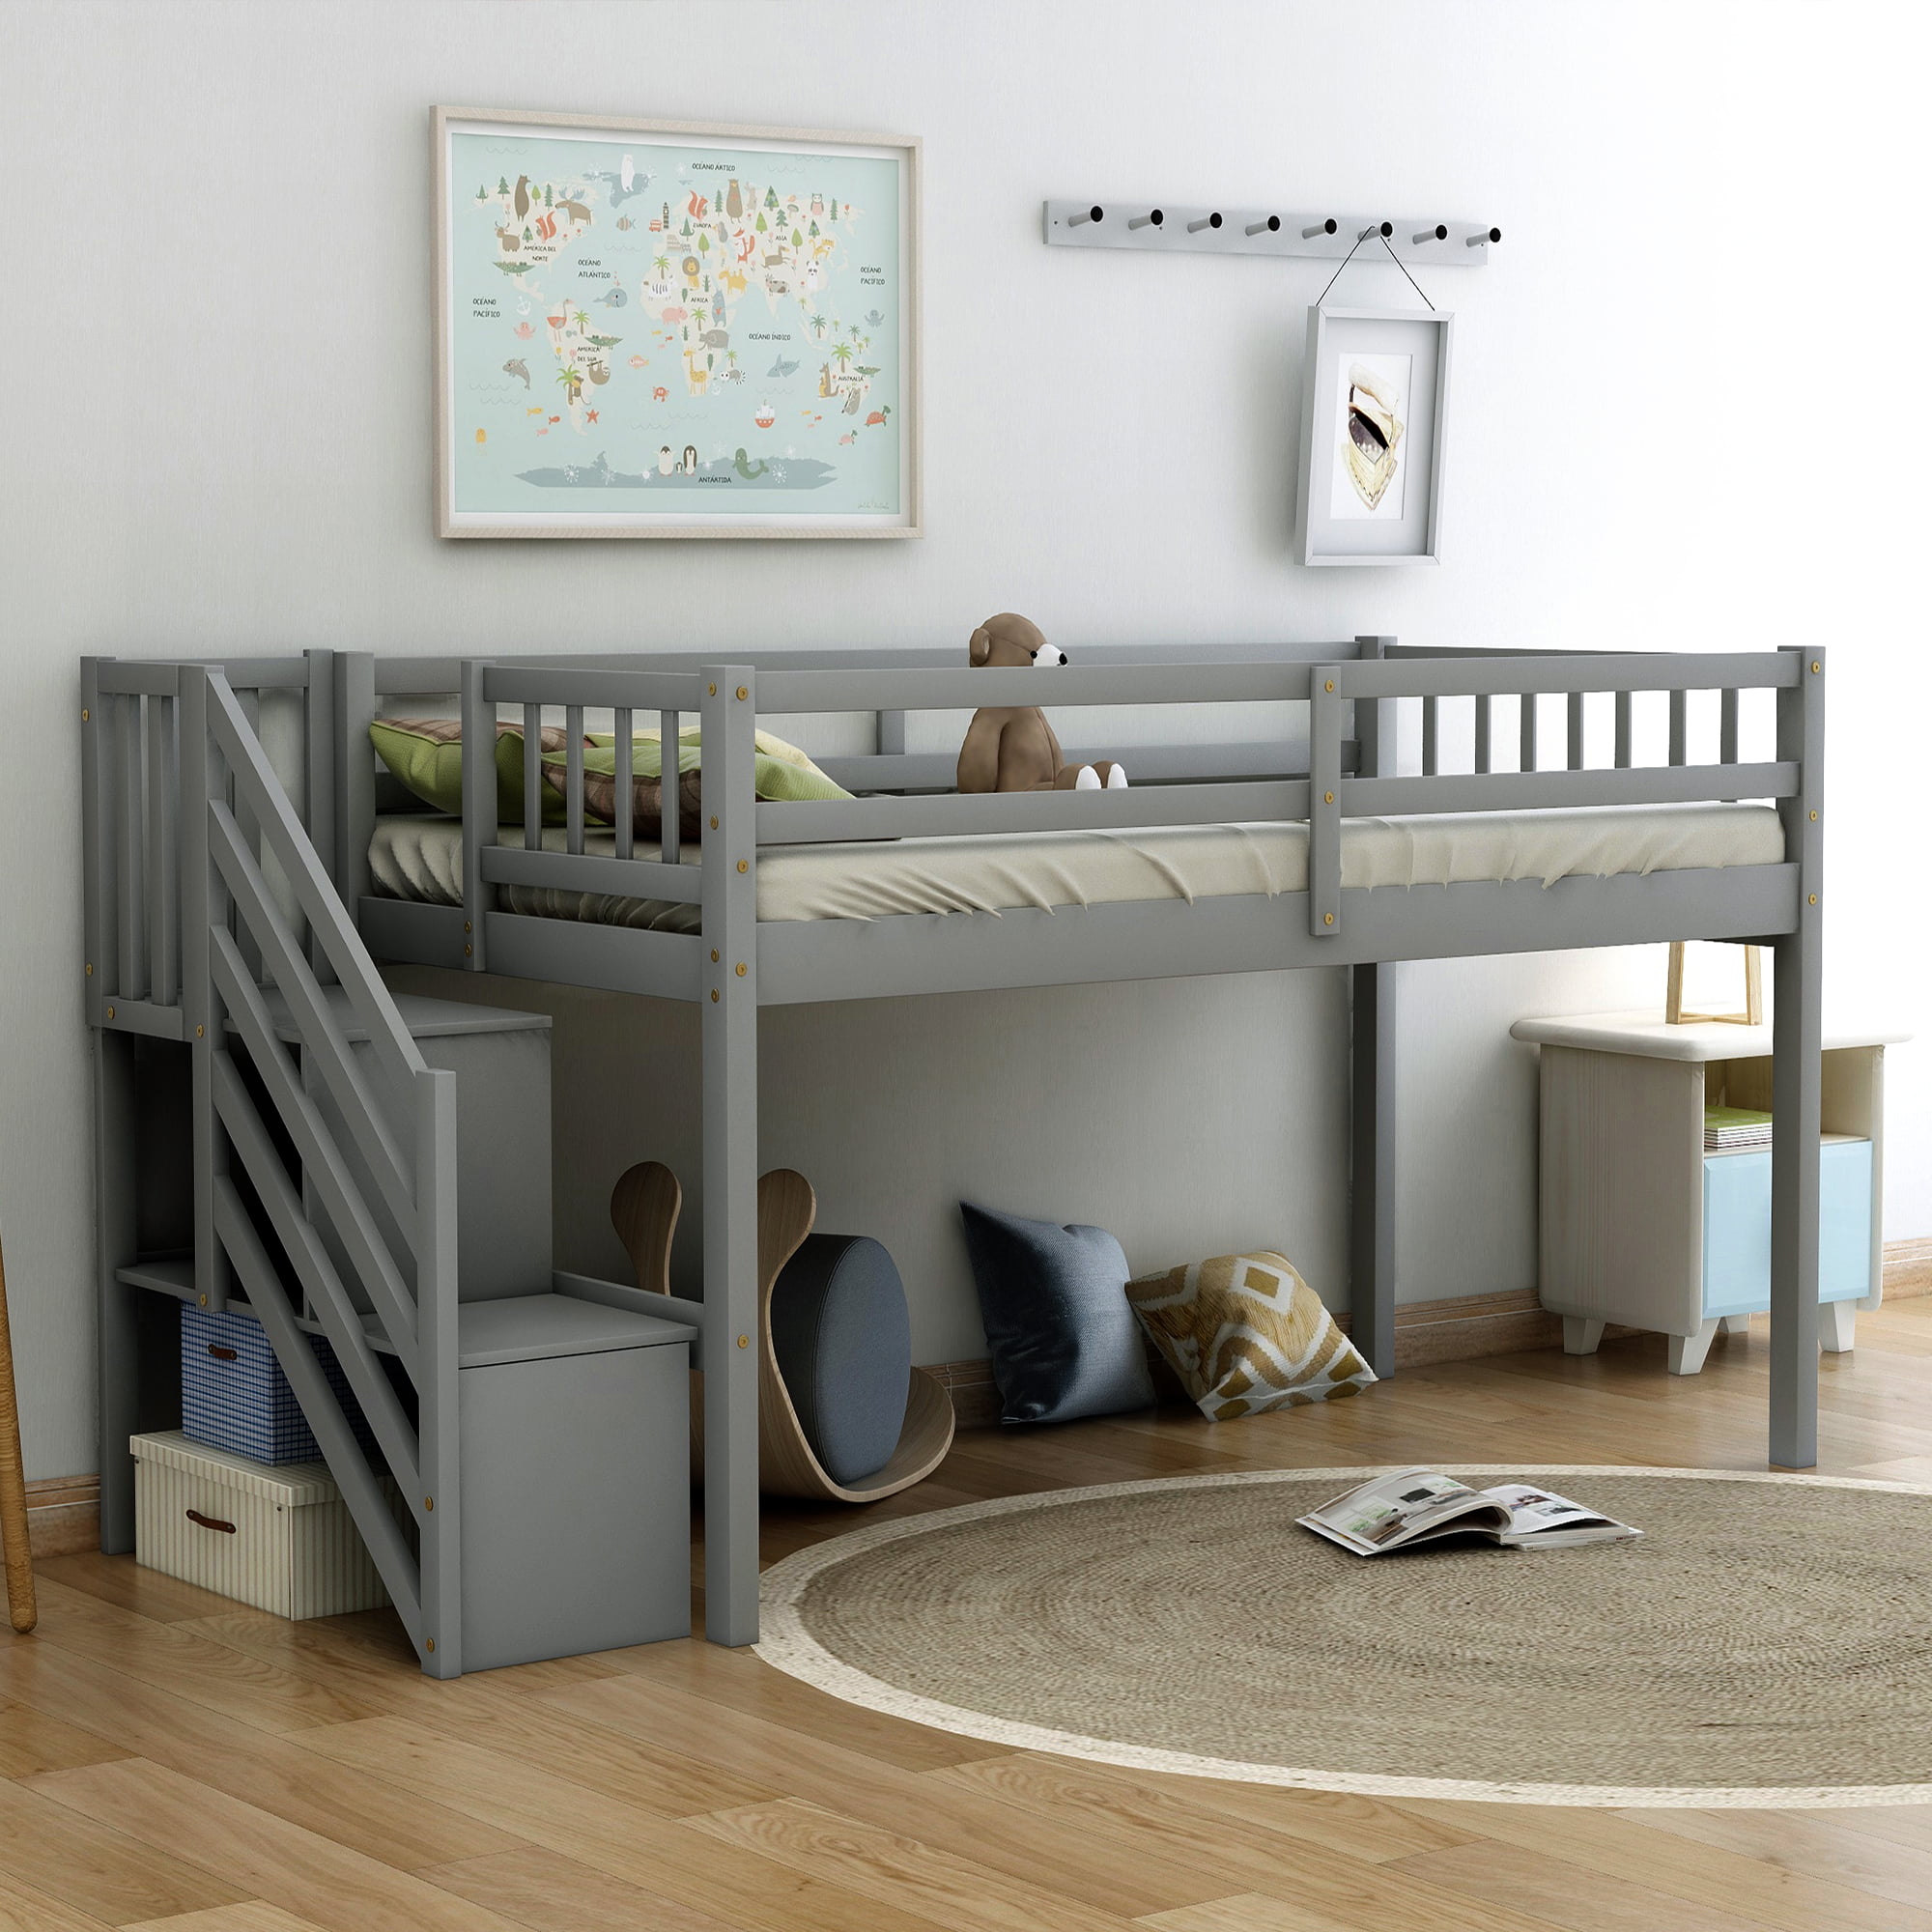 Euroco Pine Wood Loft Bed Storage Twin, Bunk Bed With Space Underneath